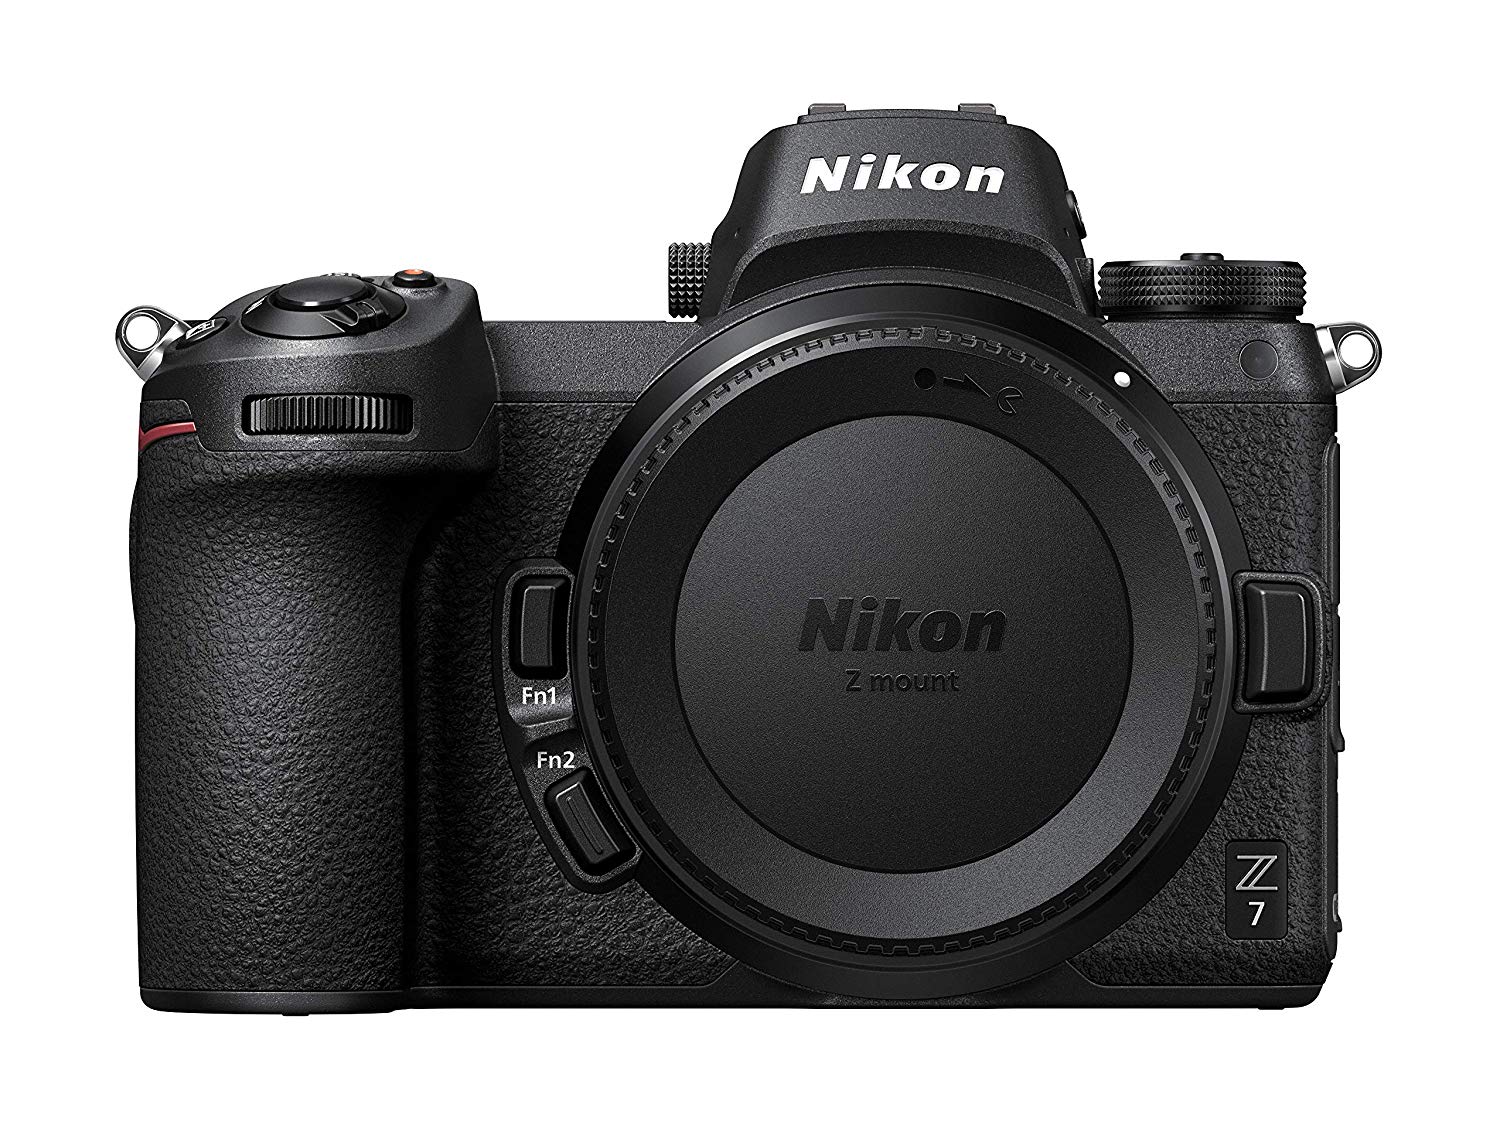 11 Things You Need to Know When Considering the Nikon Z7